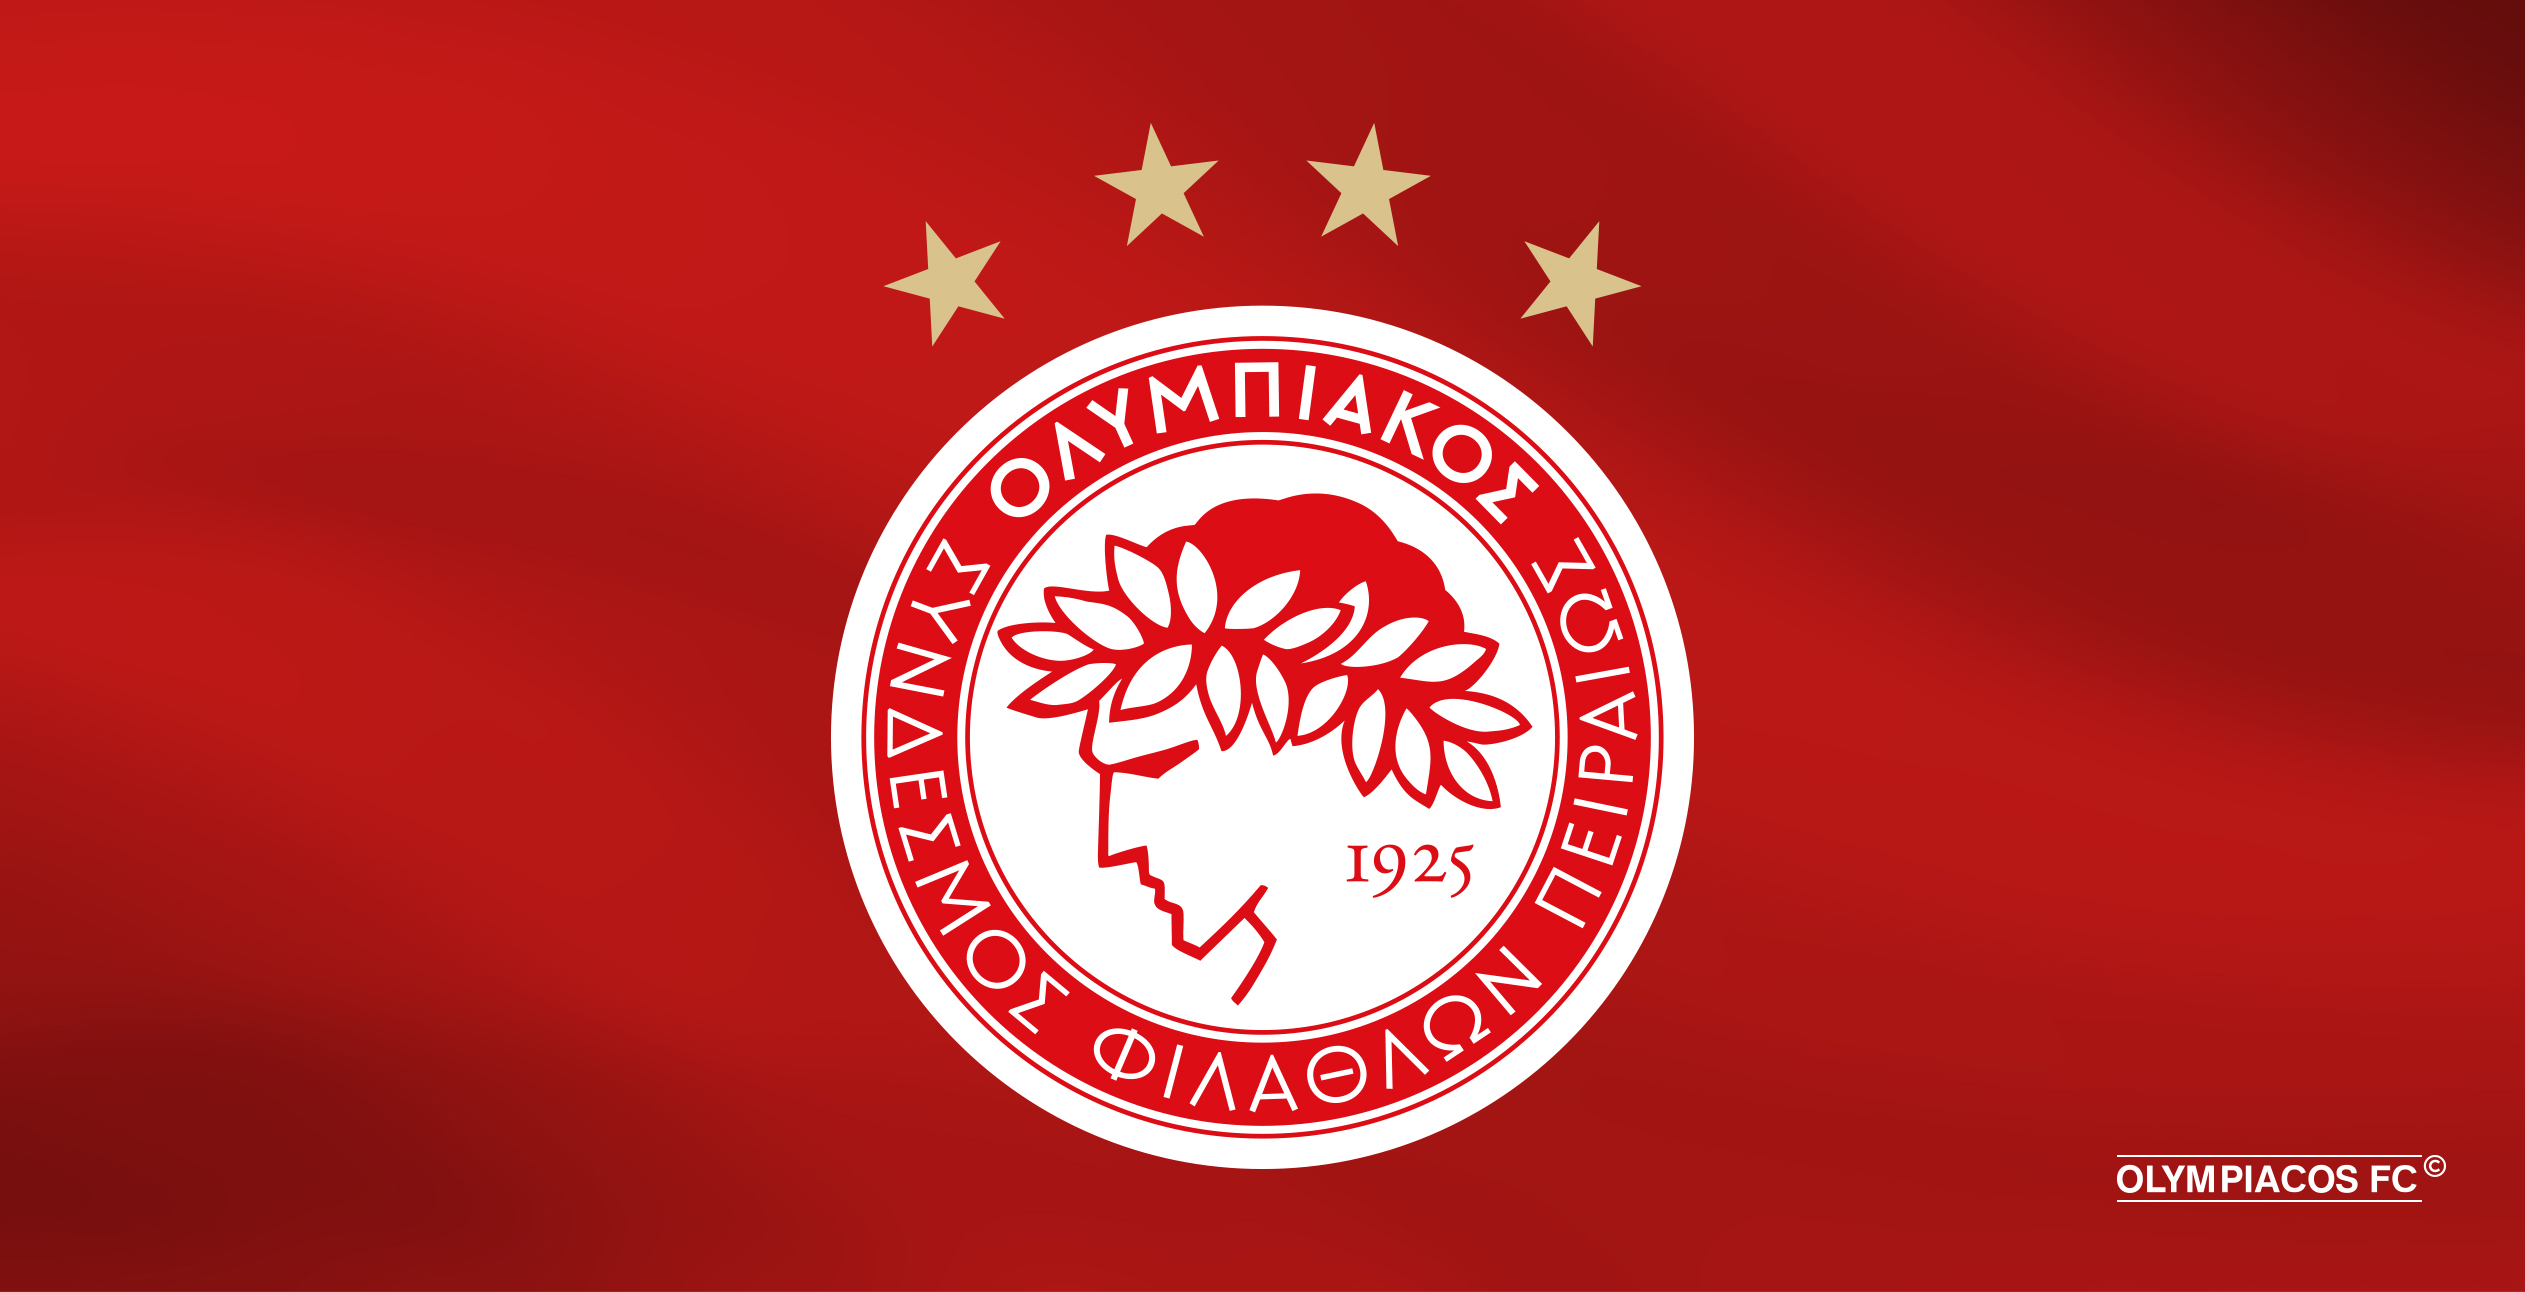 Olympiacos FC - Announcement - ΟΛΥΜΠΙΑΚΟΣ - Olympiacos.org